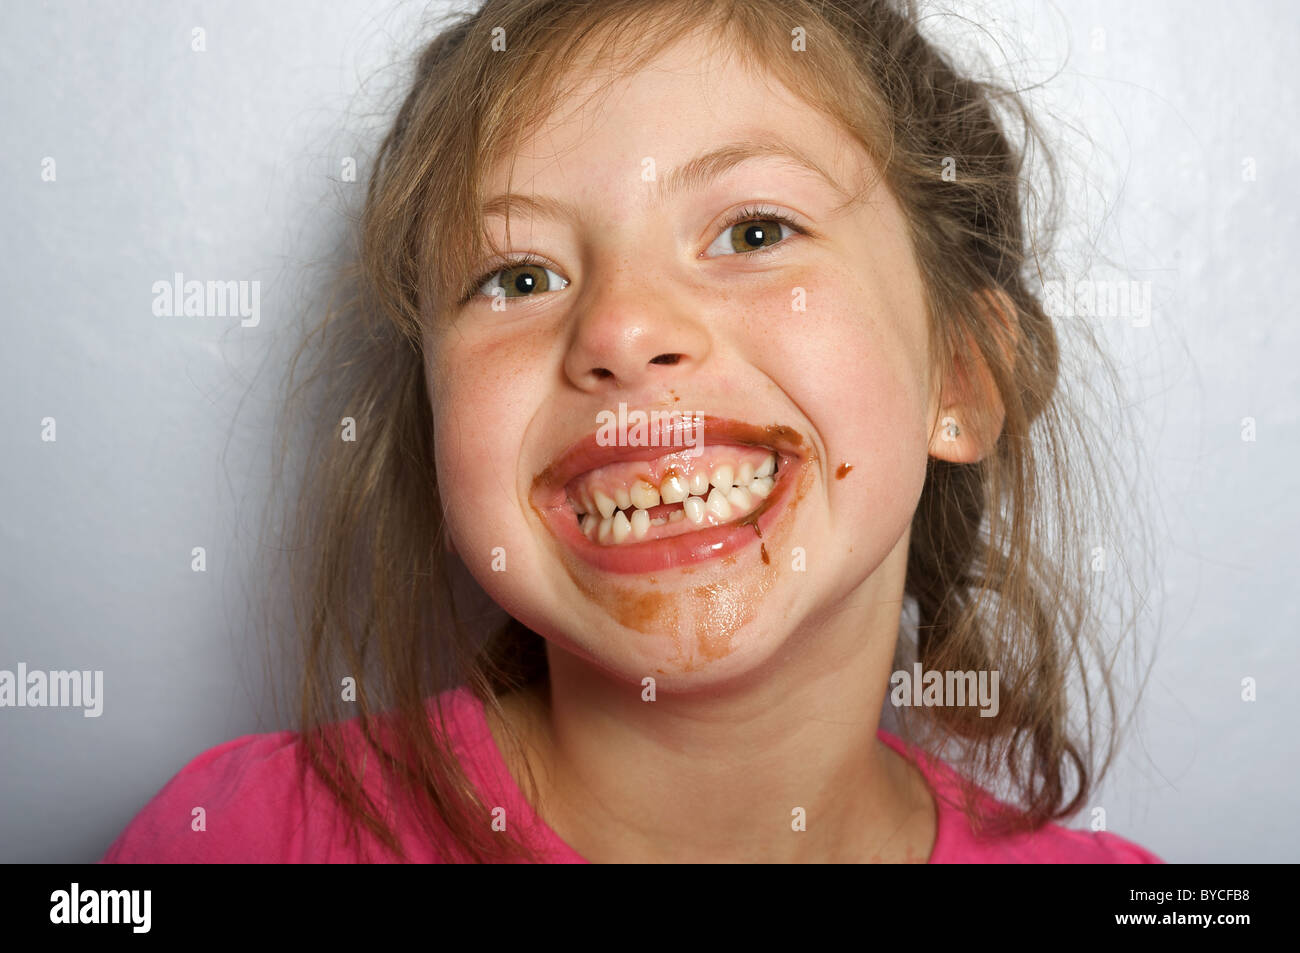 Young girl with chocolate covered face Stock Photo